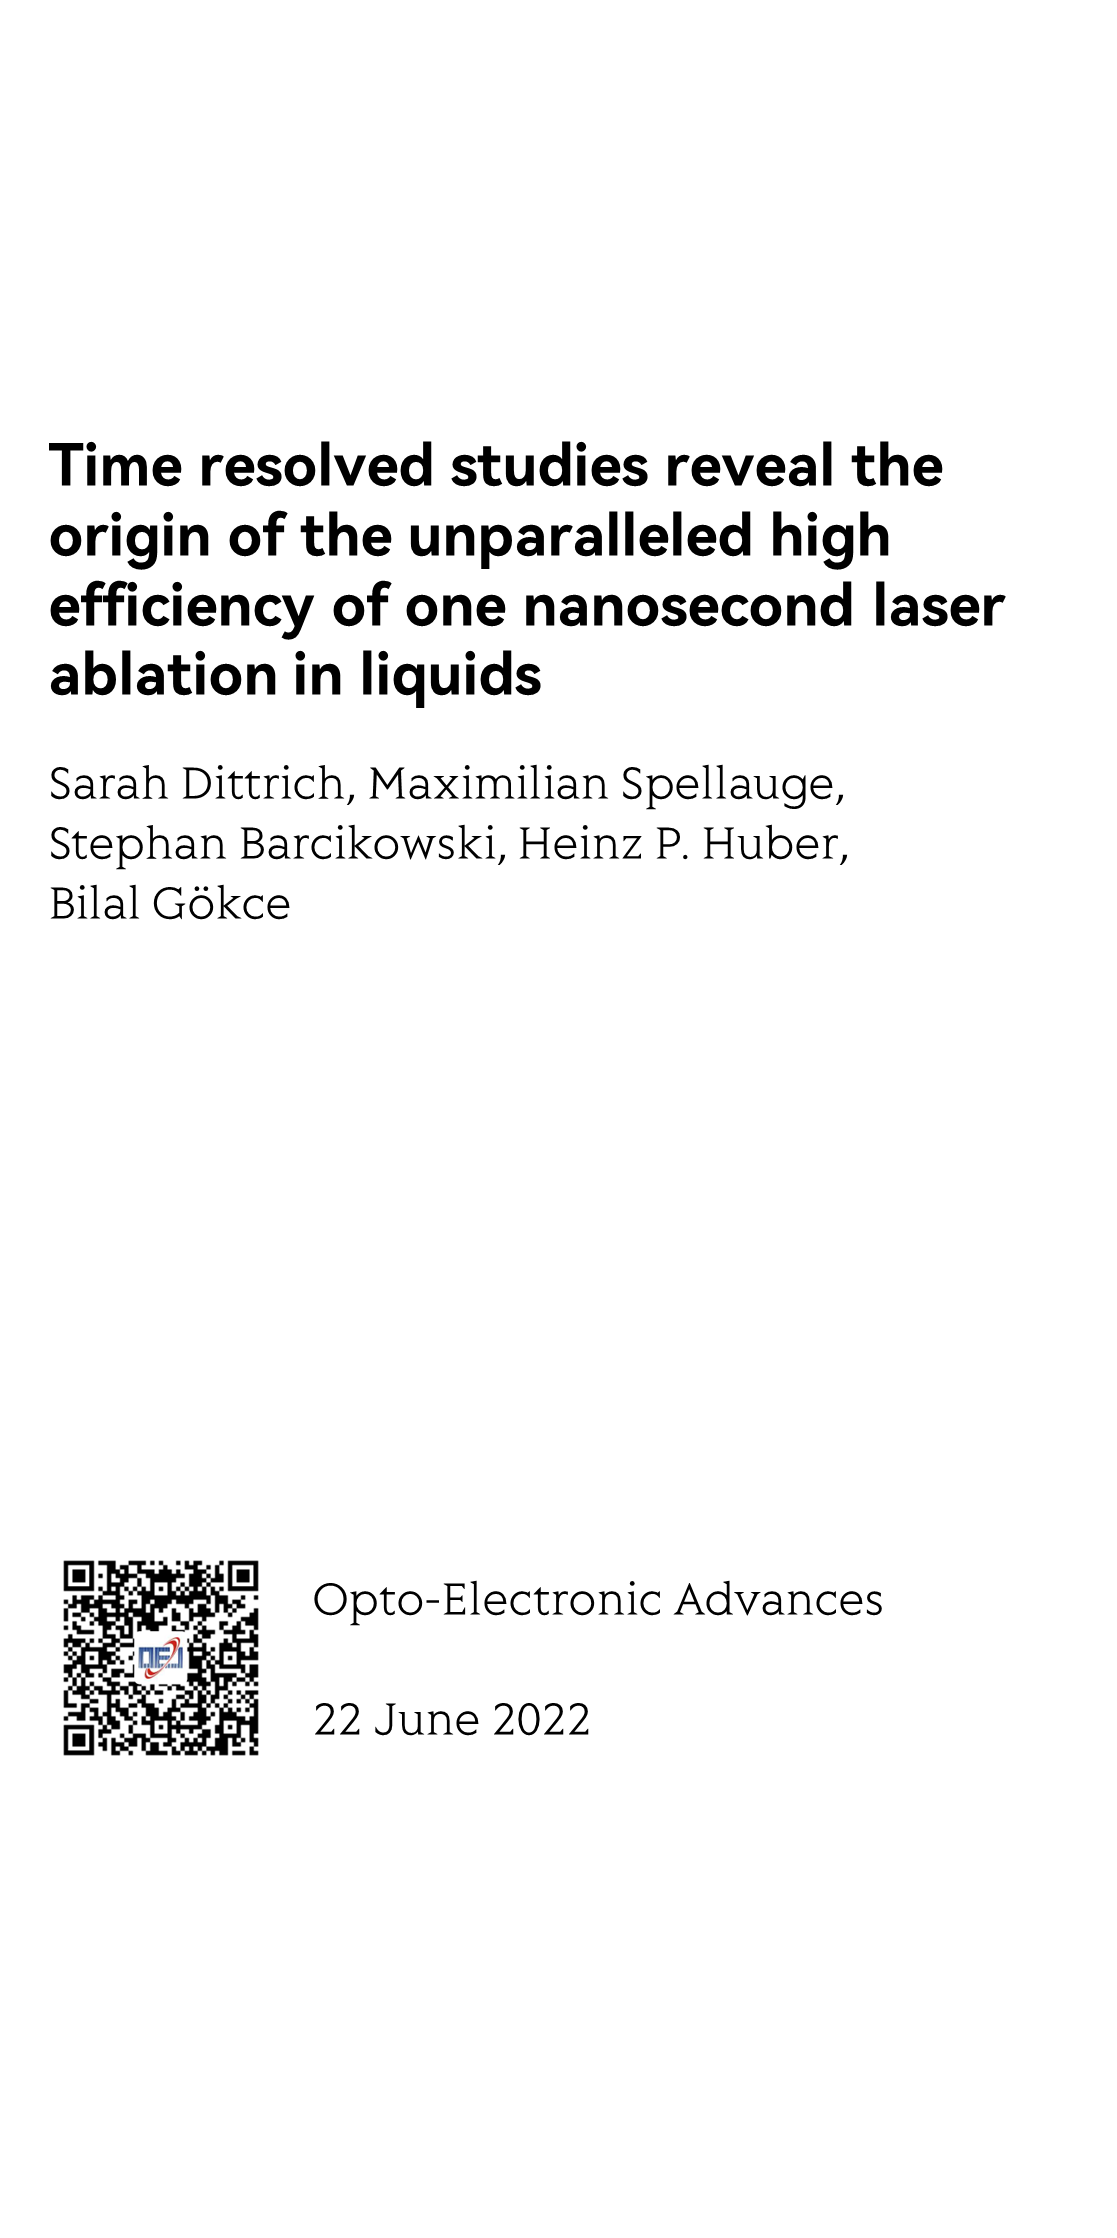 Time resolved studies reveal the origin of the unparalleled high efficiency of one nanosecond laser ablation in liquids_1